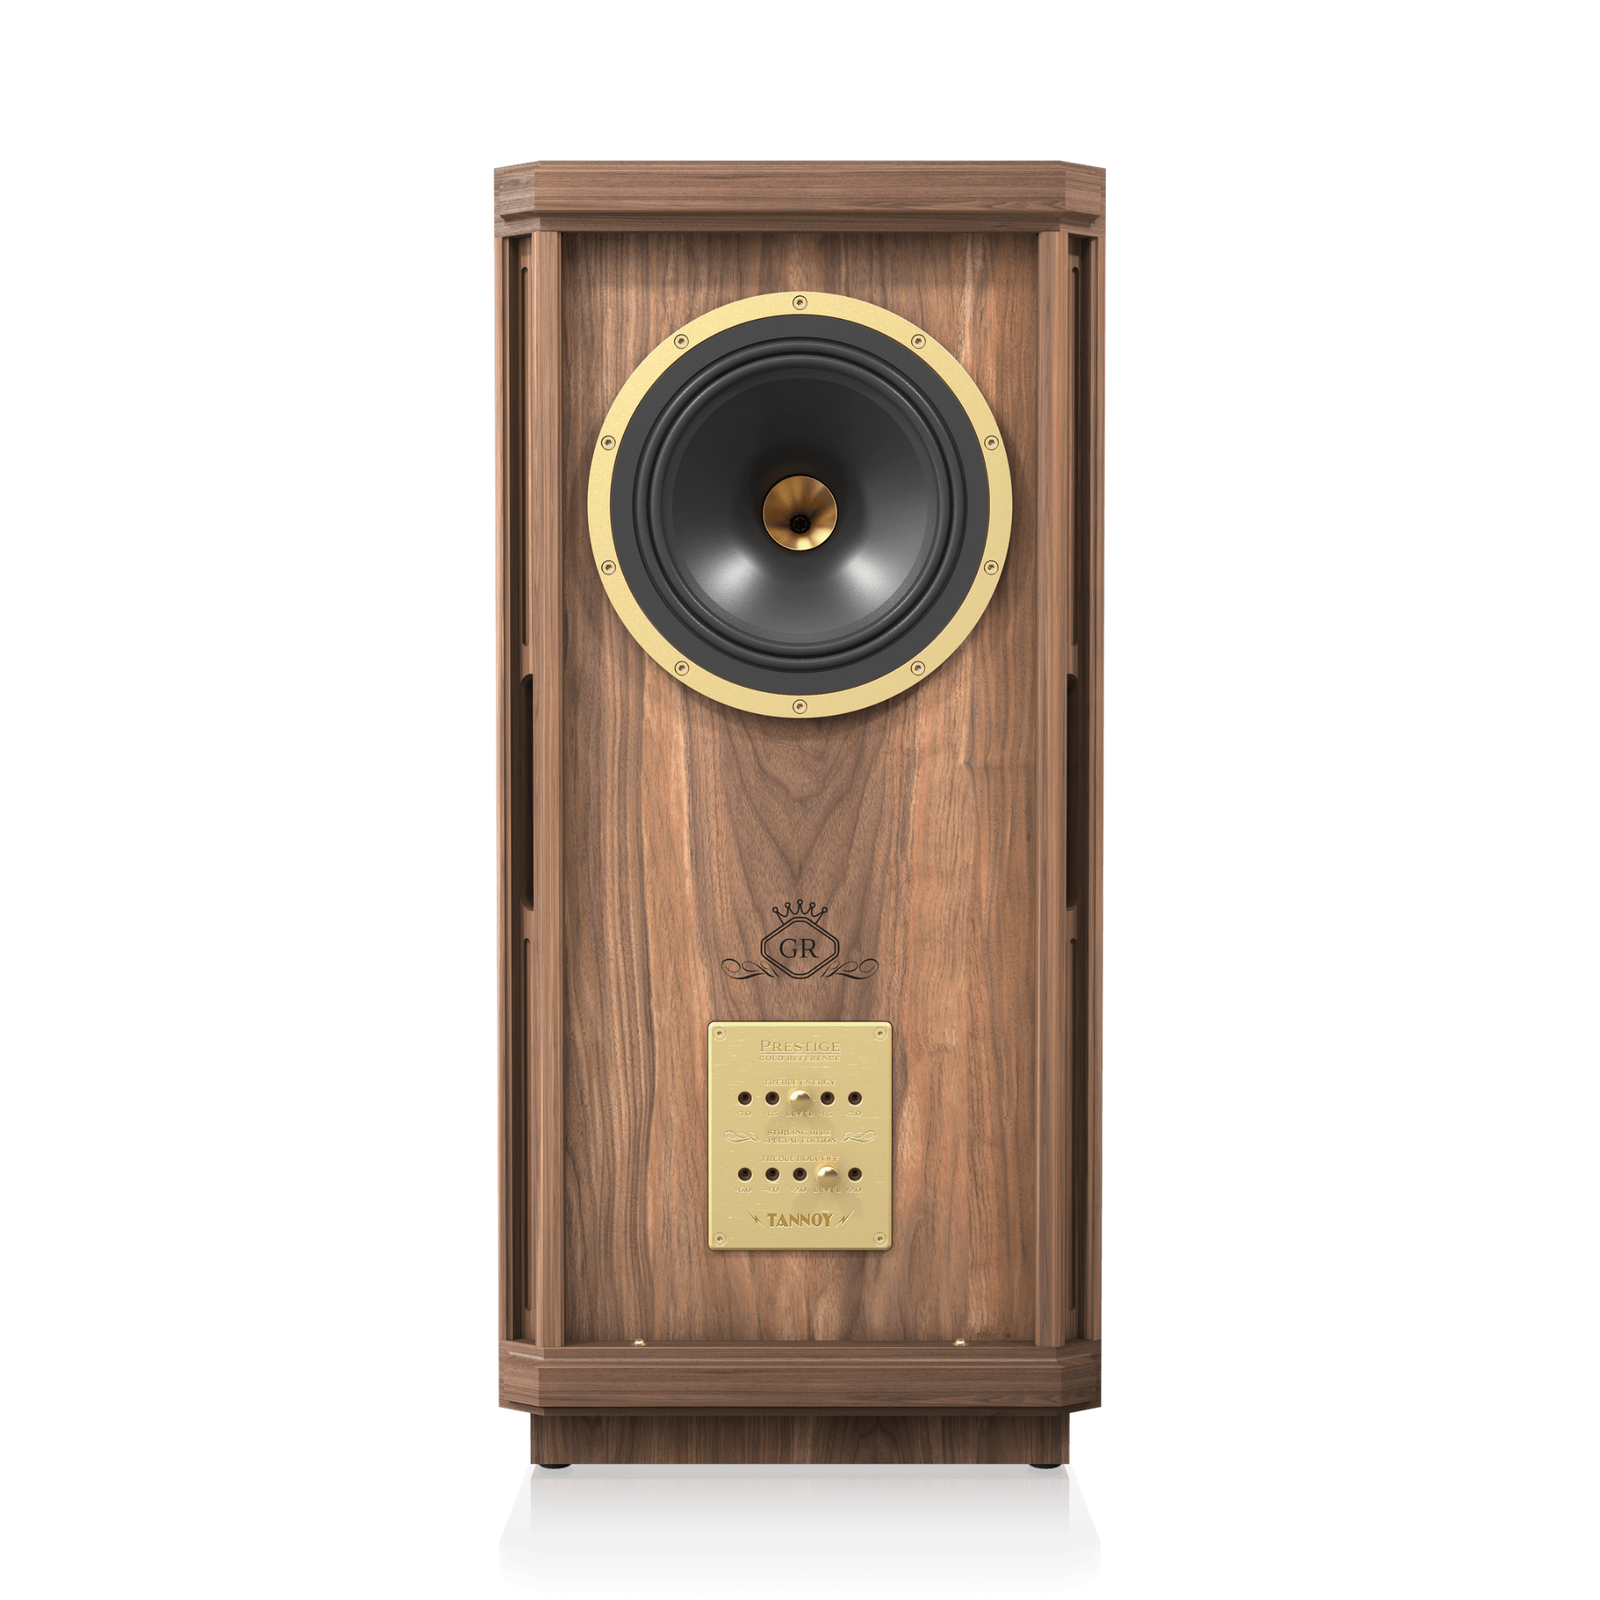 2 Way Floorstanding 10" Dual Concentric HiFi Loudspeaker (Oiled Walnut) Product Features Special Edition model, homage to the Legendary III LZ first released in 1967 2 way floorstanding loudspeaker for medium to large sized rooms Dual Concentric driver technology provides class leading coherence and point source imaging 10" highly efficient driver with 93 dB/Watt sensitivity and 500 Watt